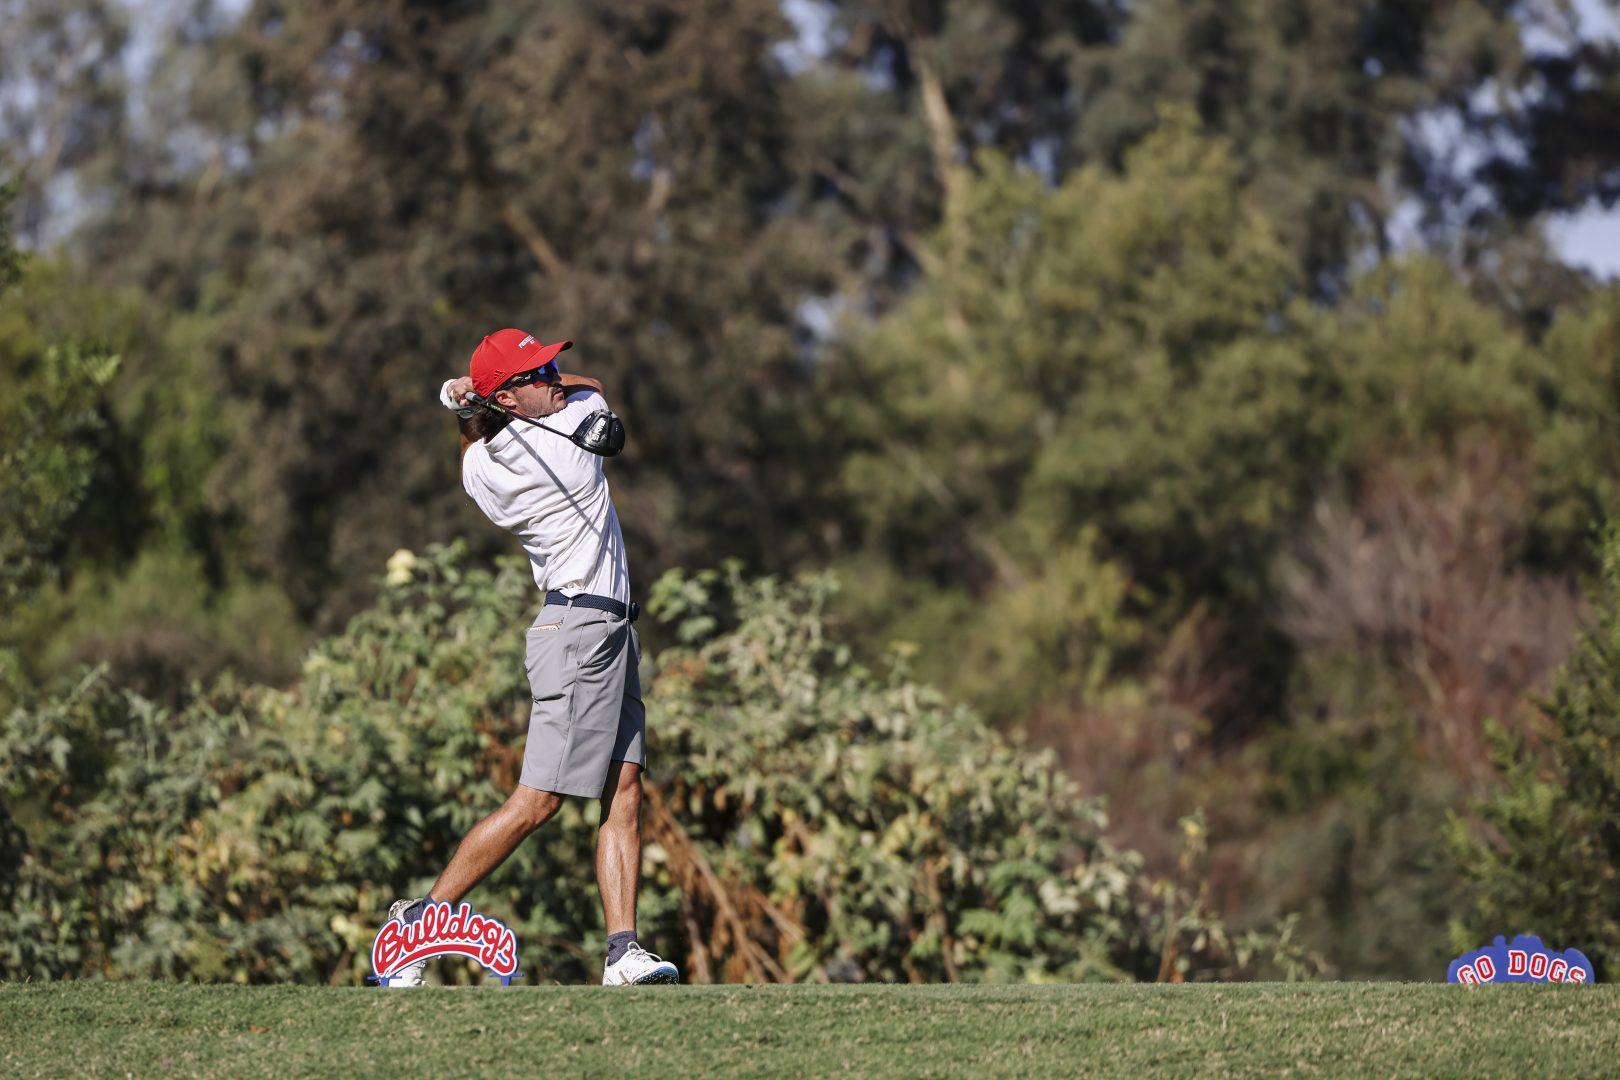 The Fresno State Bulldogs Mens Golf Team competes at the 2022 Nick Watney Invitational at the Kings River Golf Course and Country Club in Kingsburg, CA on September 26, 2022. (Samuel Marshall Photography/ Fresno State Athletics)